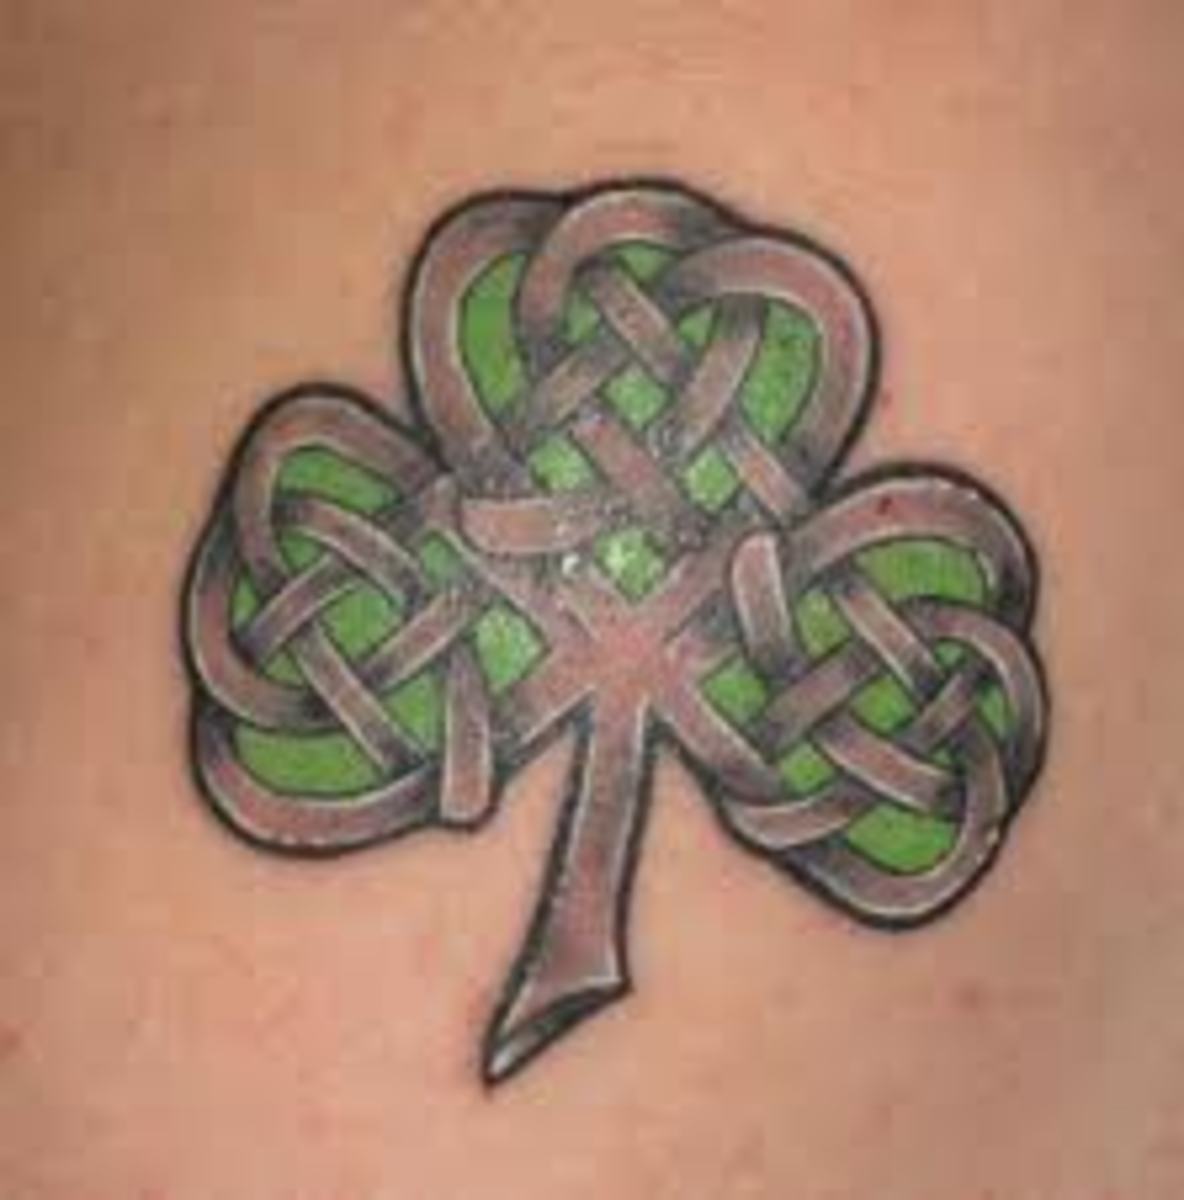 Great Ideas For Clover Tattoos;Clover And Shamrock Tattoo Meanings: Leprechaun Tattoos And Irish Symbols